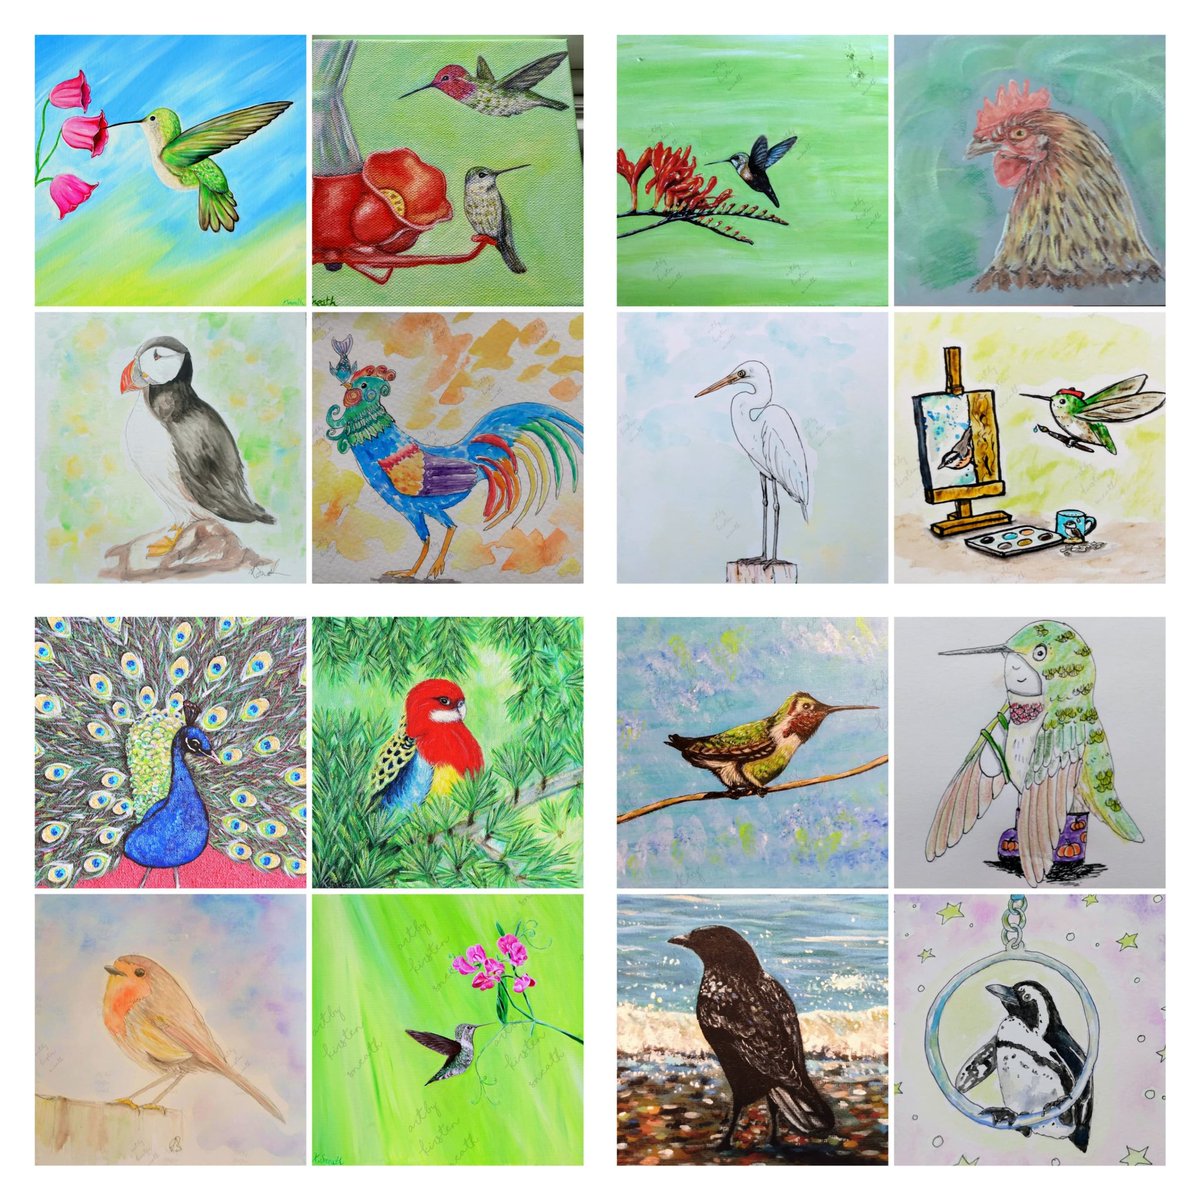 Happy National Bird Day! Love painting birds....in fact I have one on my easel right now plus a dog and a chinchilla for my daughter! I'm sure I'll paint many more! Hope you are having a great week 😊😊💕 #NationalBirdDay #birdpaintings #birddrawings #lovebirds #birdwatching